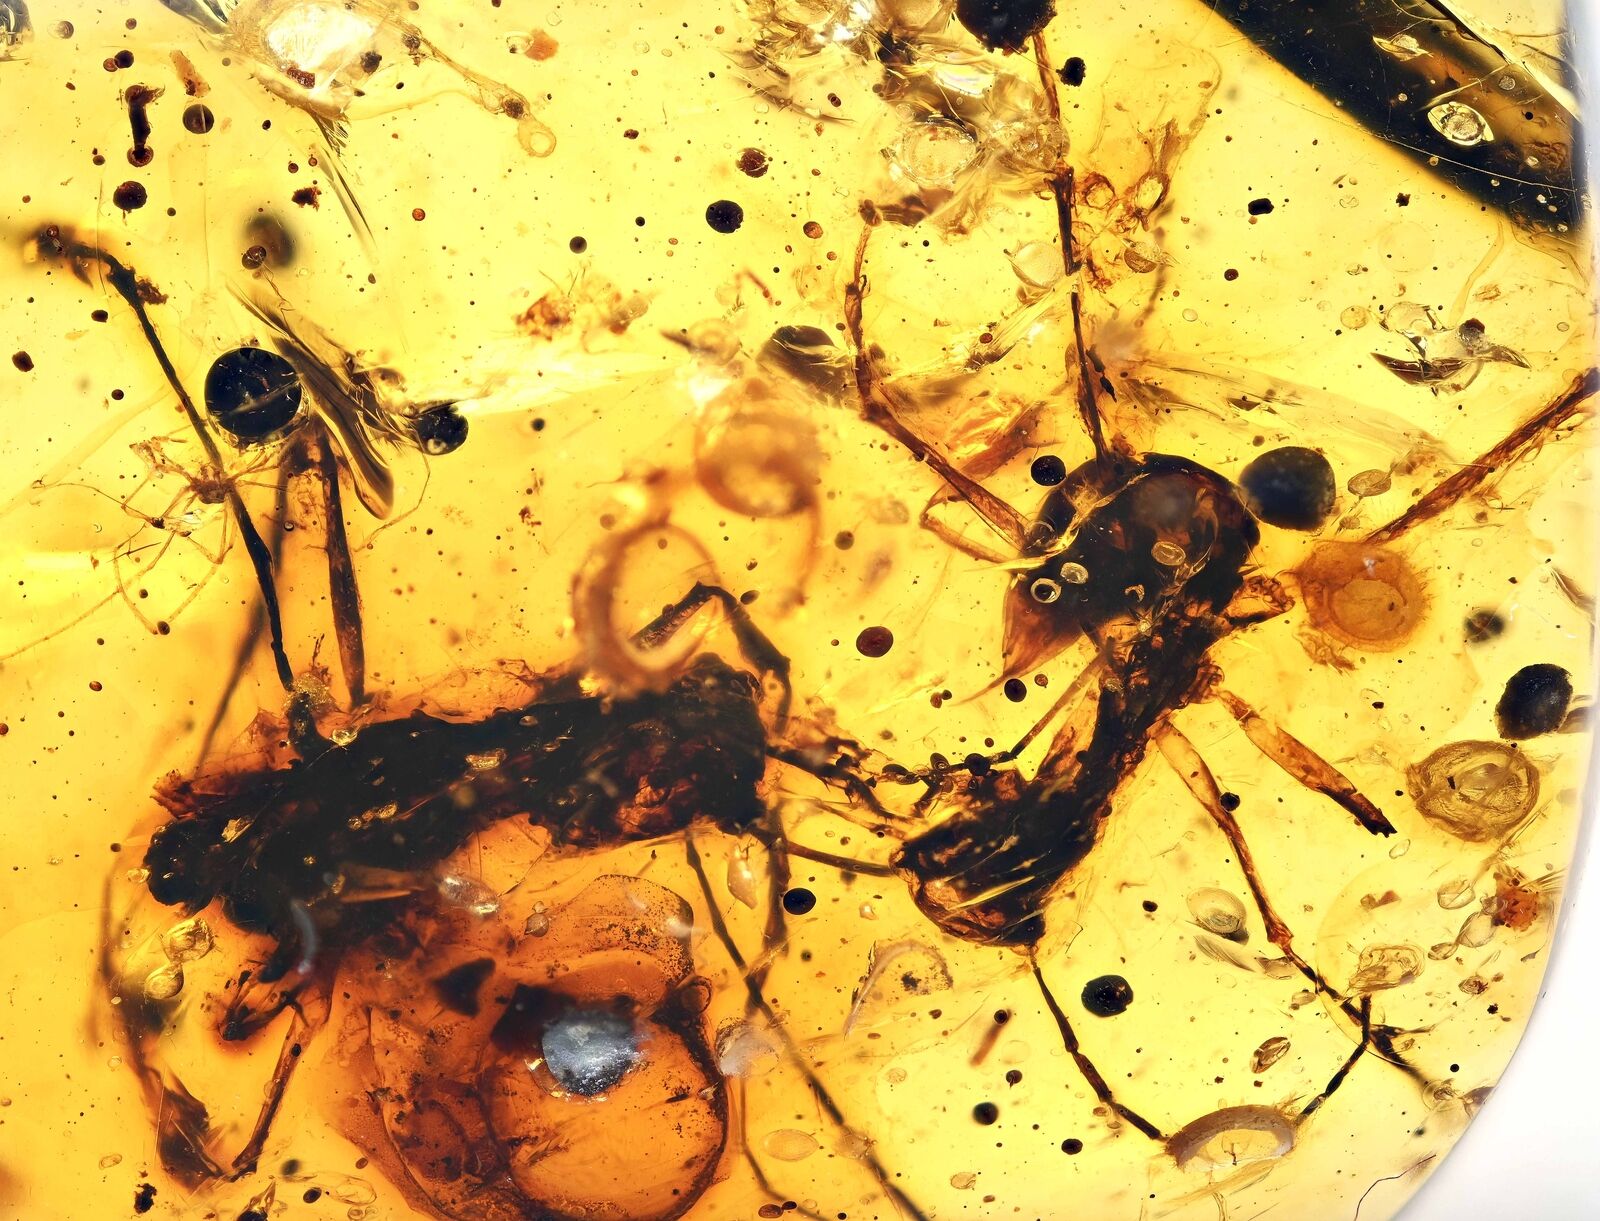 Two Extinct Large Ants with stingers, Fossil inclusion in Burmese Amber